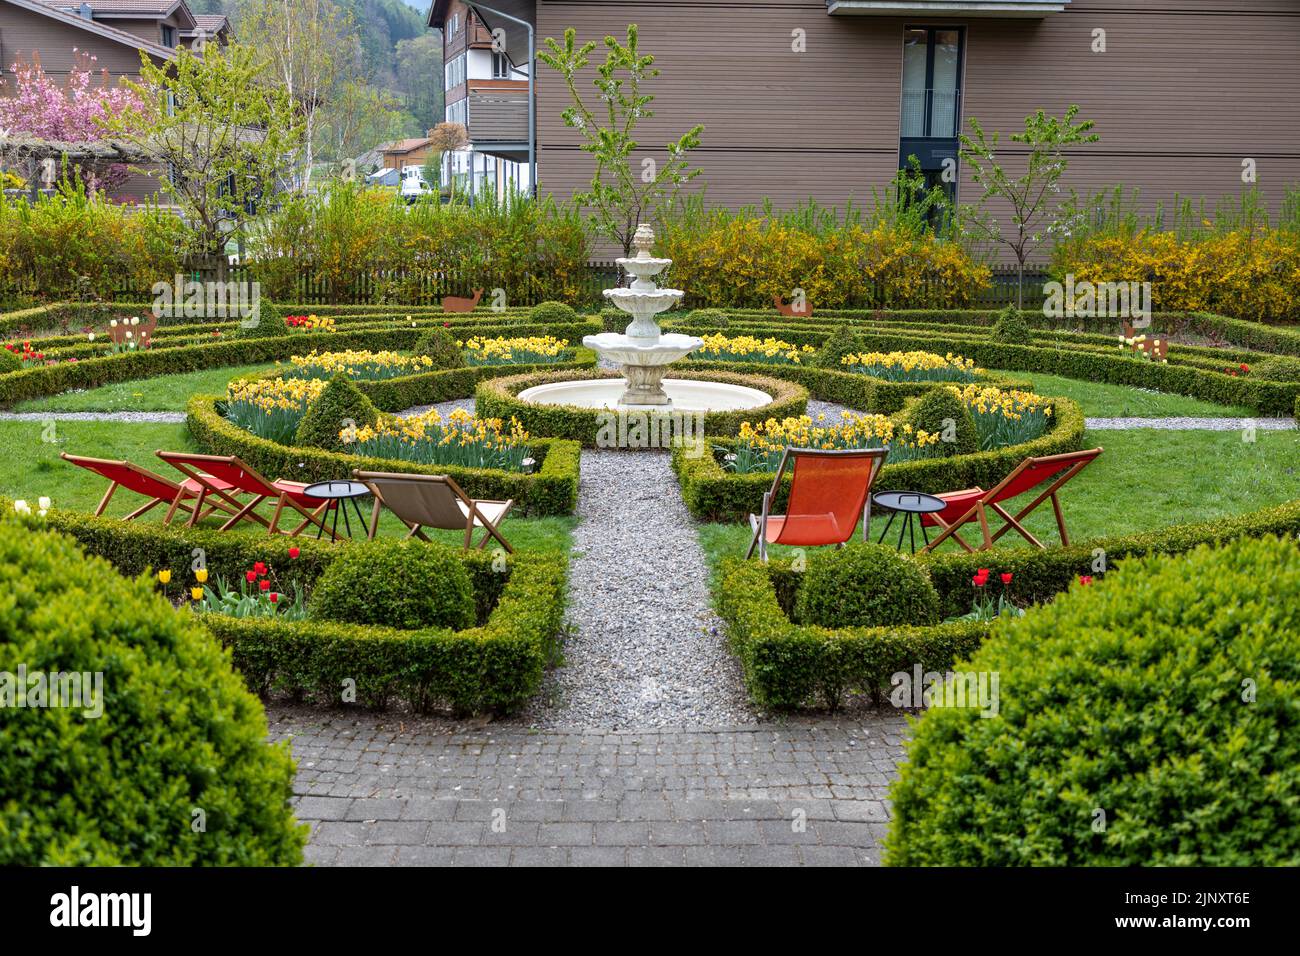 Formal garden with a fountain in the middle and yellow daffodils growing in the flower beds.  Red lounge chairs on the grass. Stock Photo